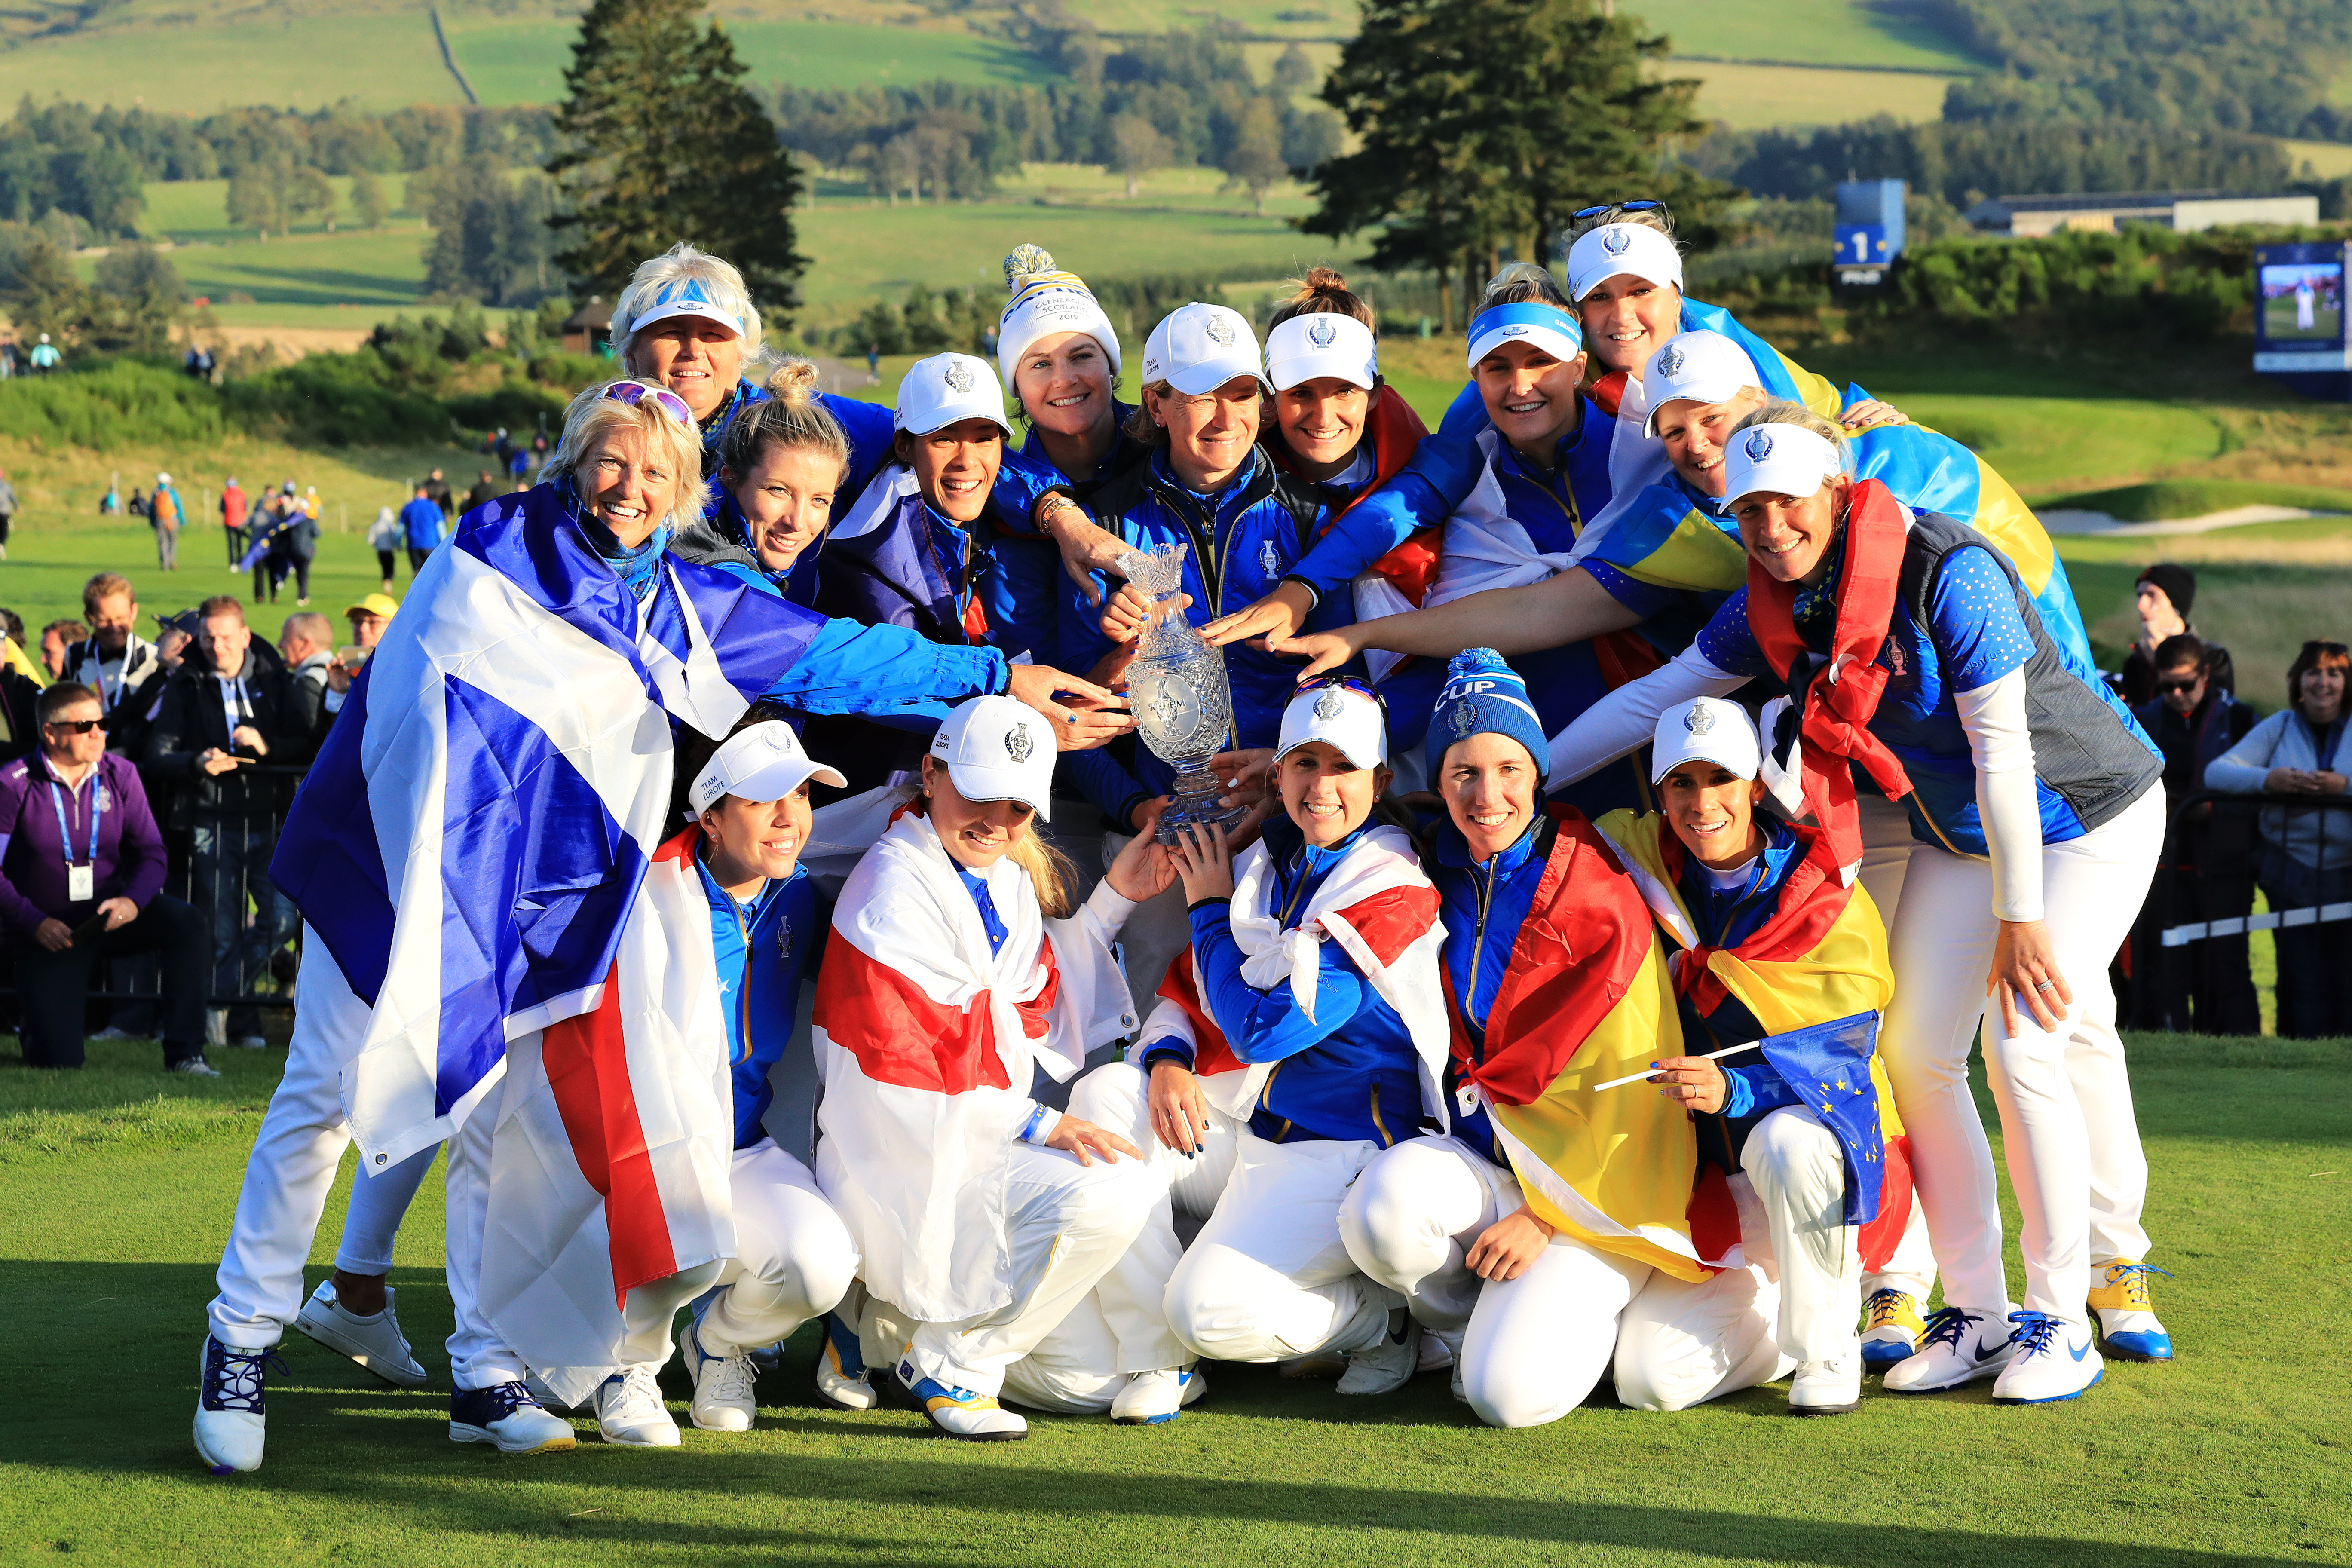 The victorious European team with the Solheim Cup.